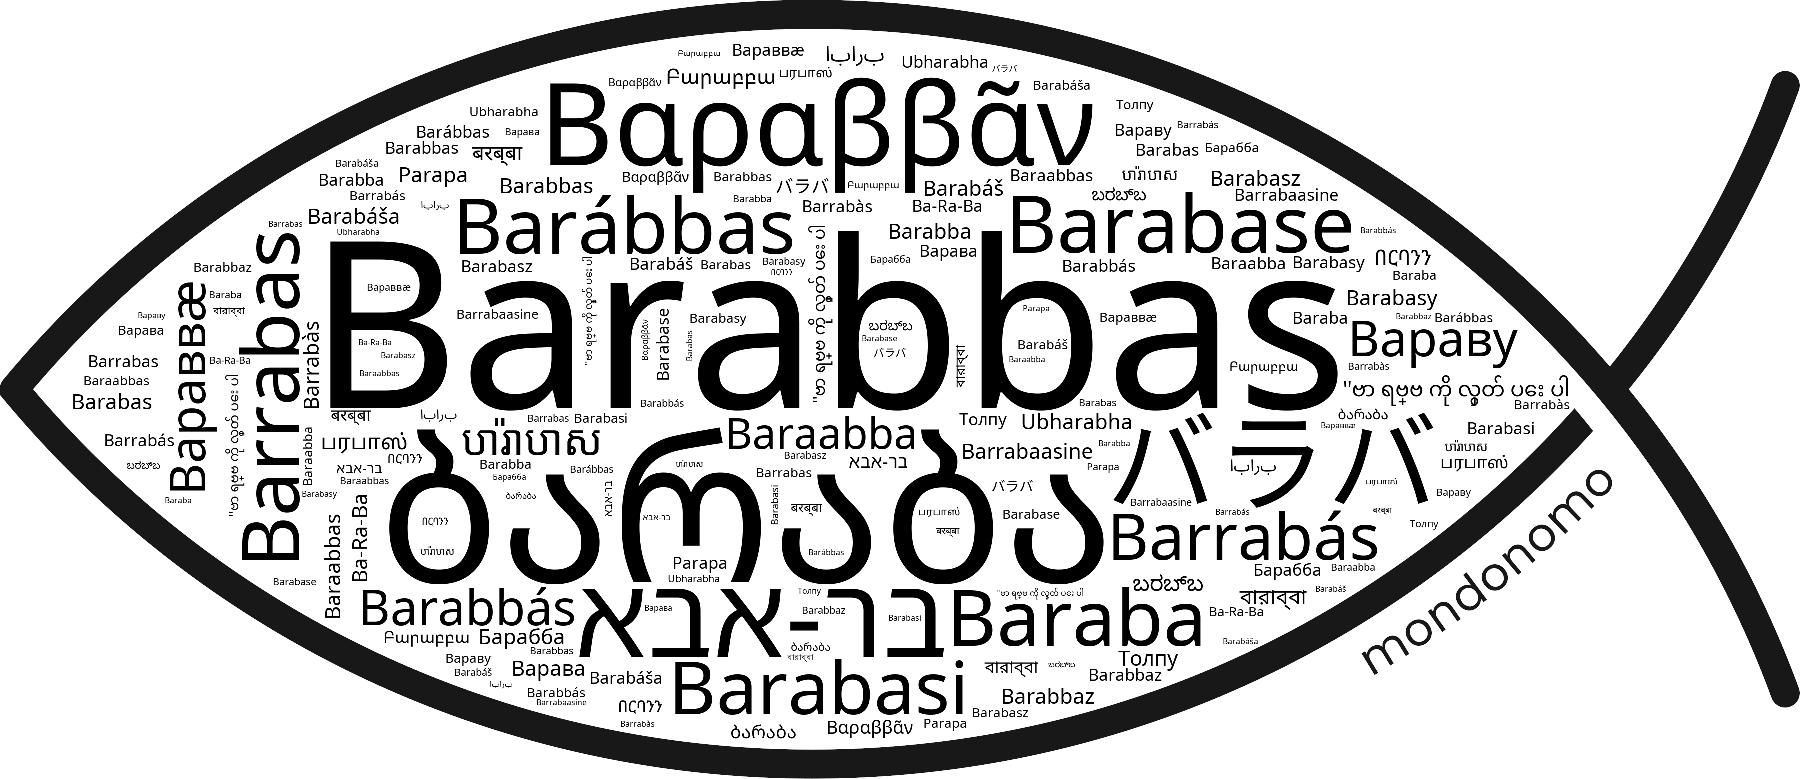 Name Barabbas in the world's Bibles